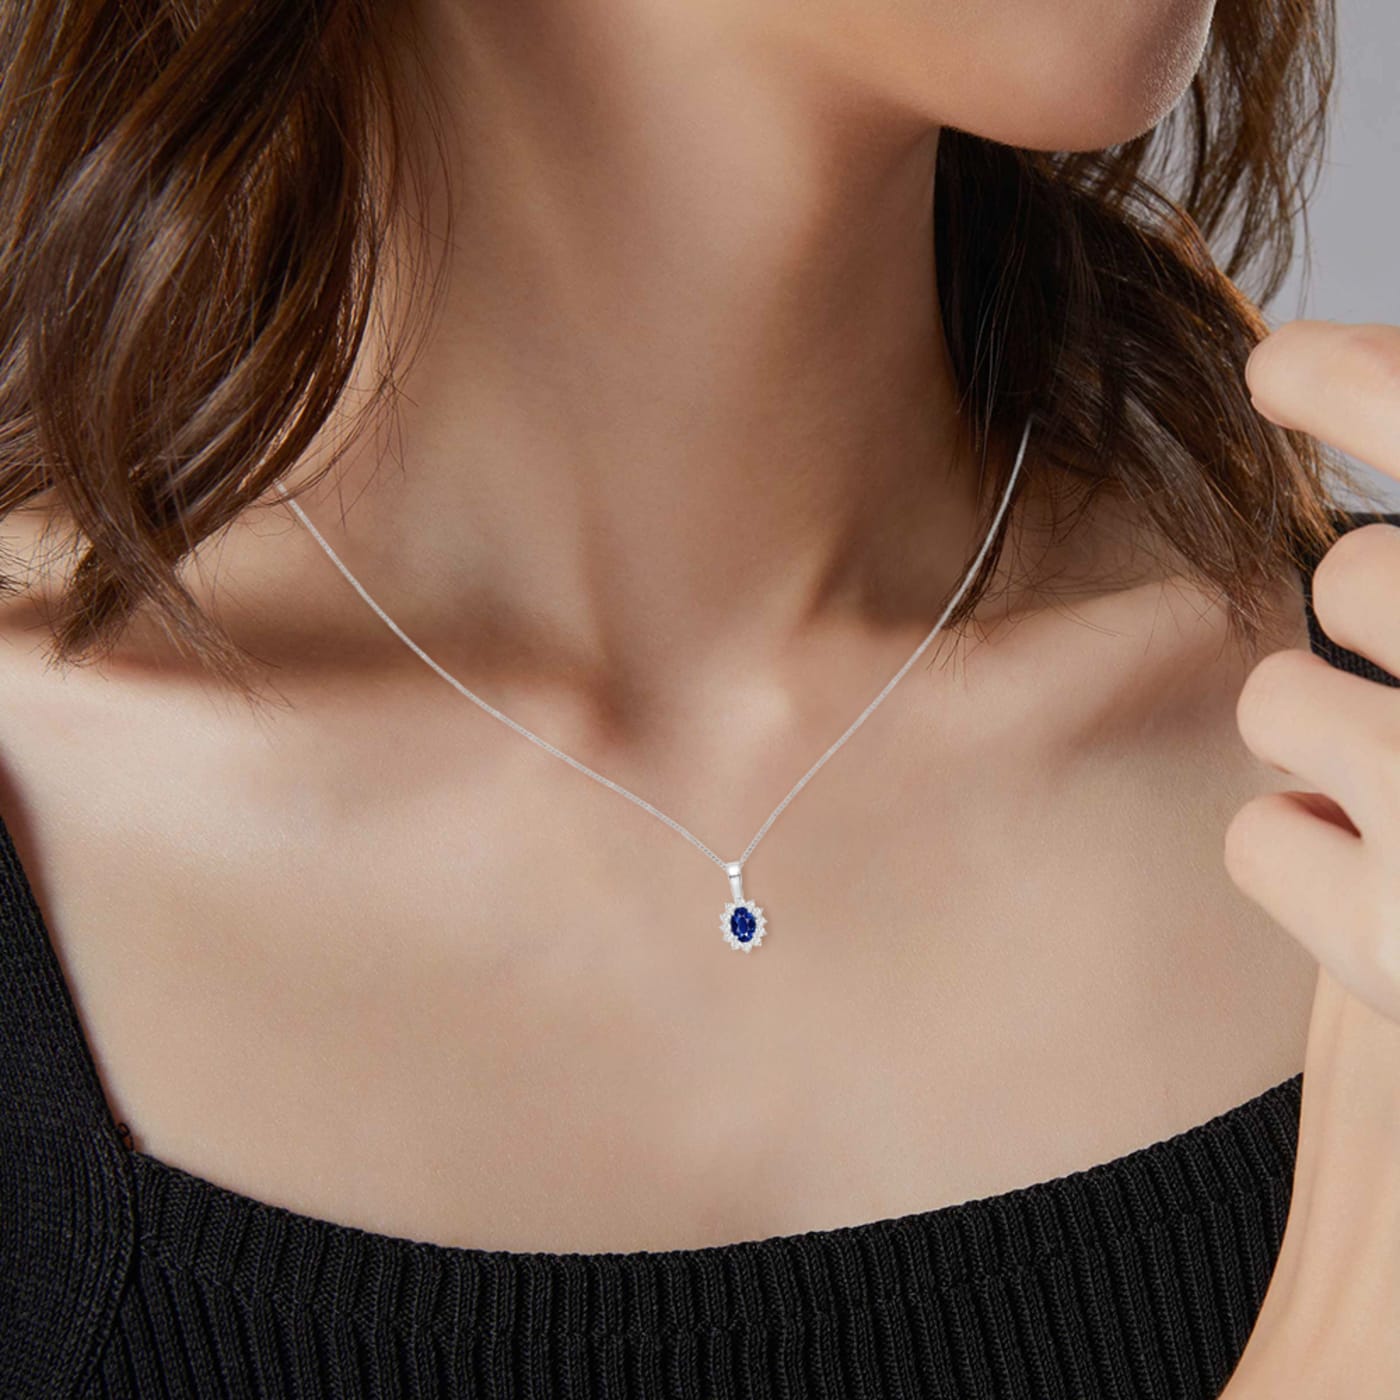 1.26 ctw Oval Blue Sapphire and Diamond Pendant in 14K Yellow Gold